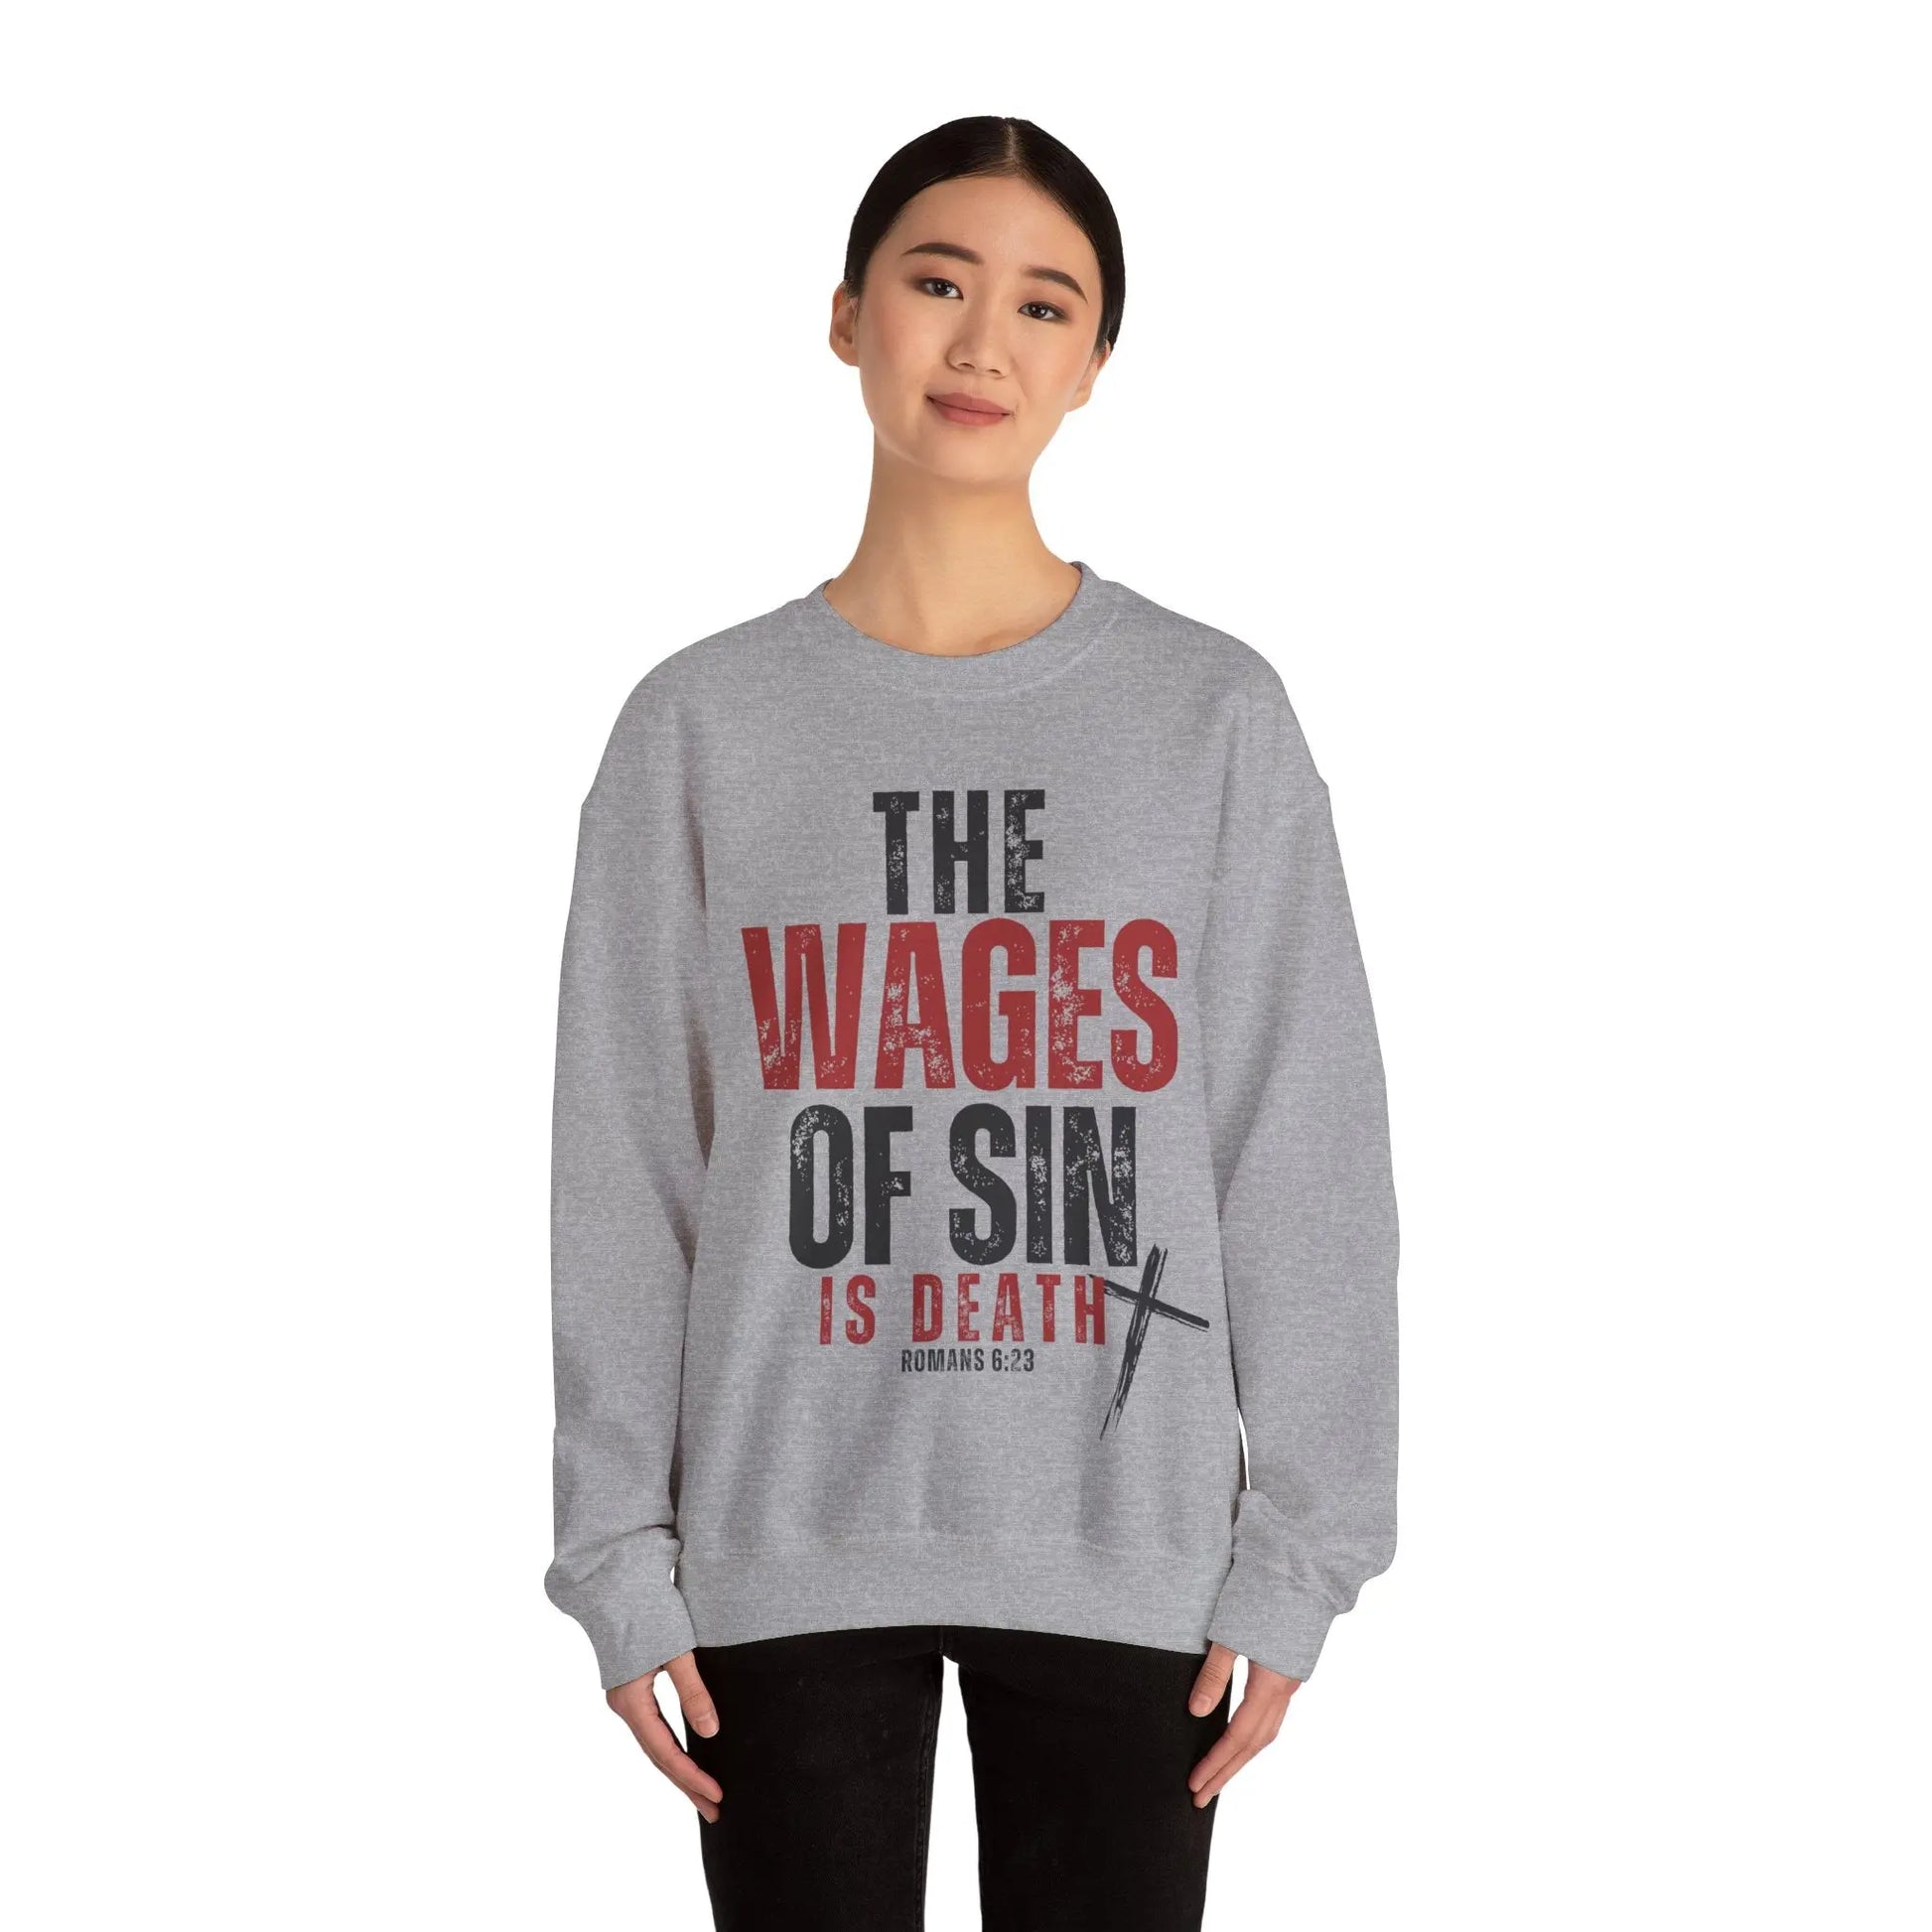 Romans 6:23 The Wages of Sin is Death Bible Verse Scripture Christian Mens Faith God Jesus Bible Christian Gifts Crewneck Sweatshirt - Stay Tomorrow Needs You Romans 6:23 The Wages of Sin is Death Bible Verse Scripture Christian Mens Faith God Jesus Bible Christian Gifts Crewneck Sweatshirt